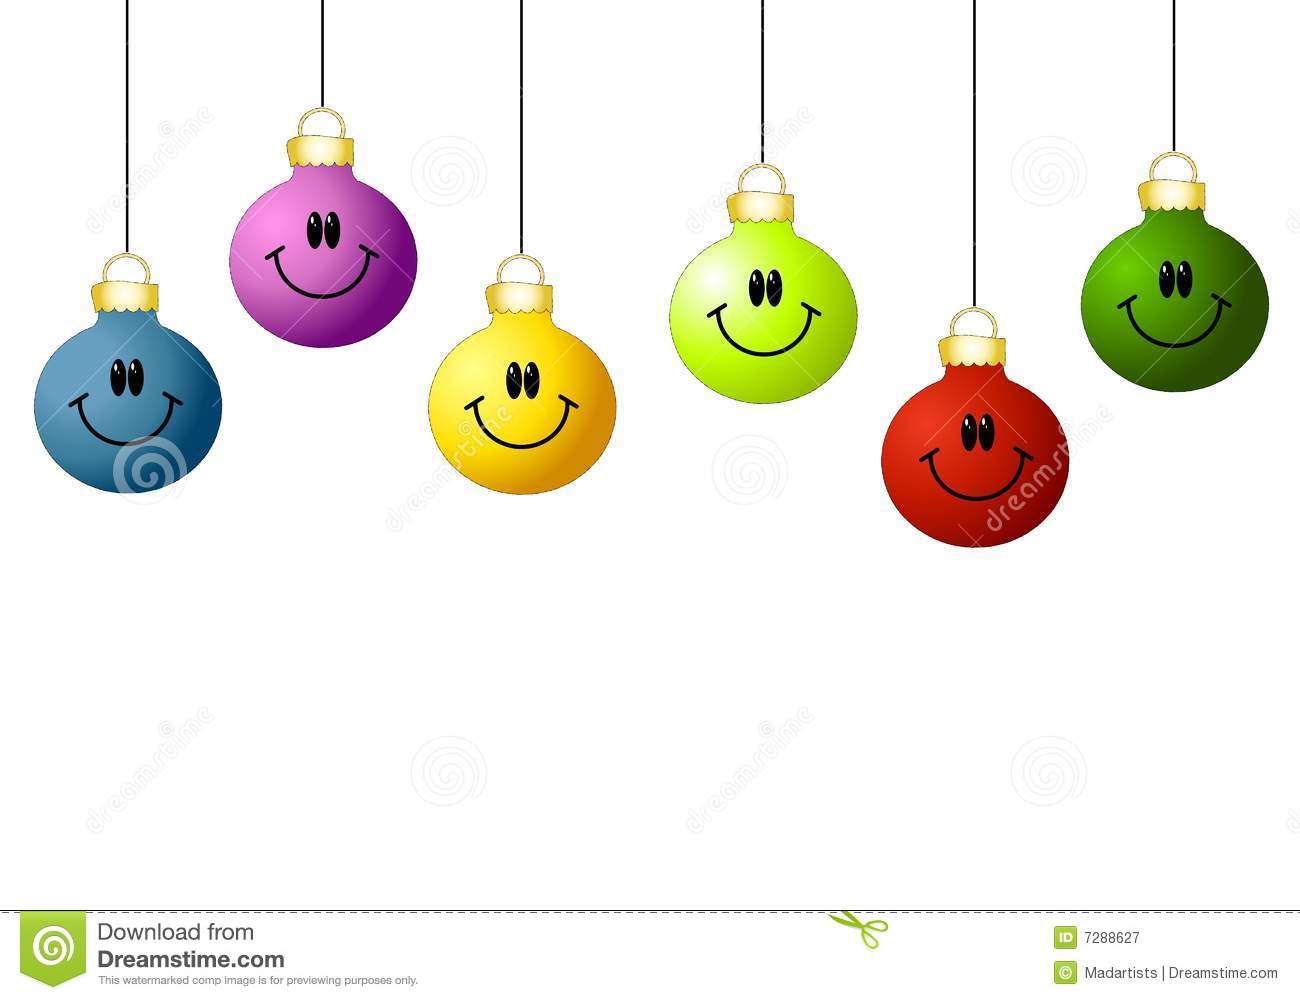 Smiley Face Ornaments Royalty Free Stock Photography   Image  7288627